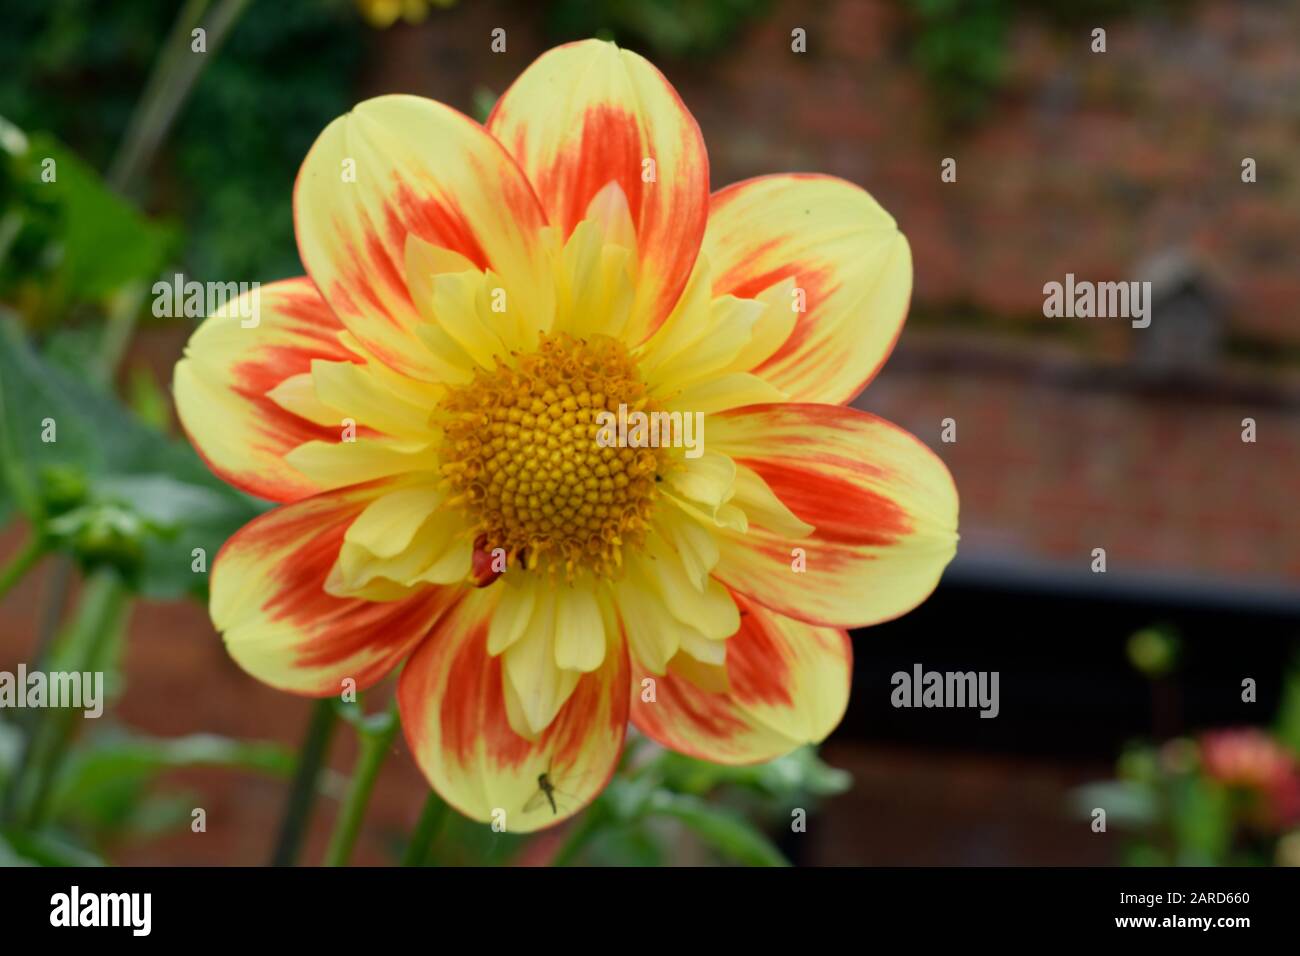 Dahlia. Name Pooh. Close up of a single yellow flower with patchy red stipes on petals. Stock Photo